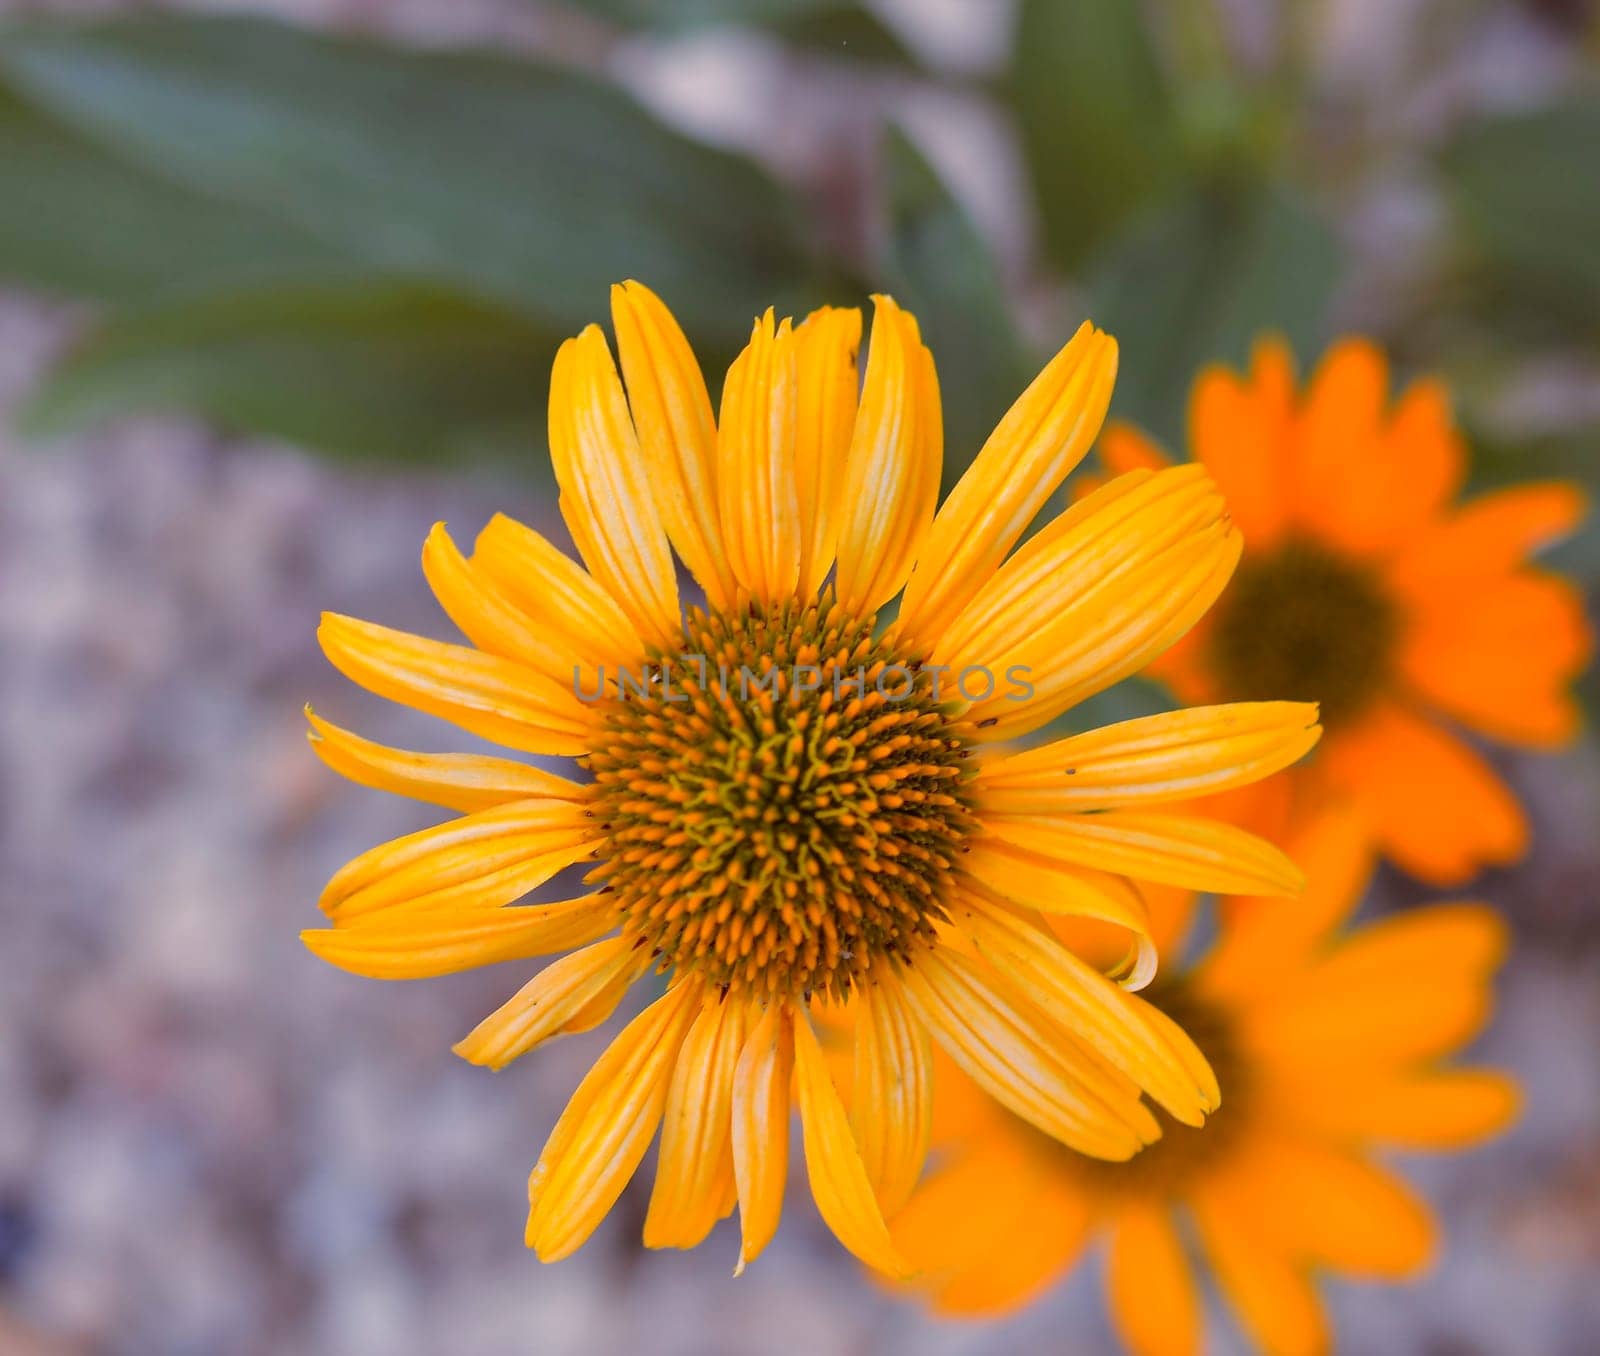 The family Asteraceae with the original name Compositae. Commonly referred to as the aster, daisy, composite, or sunflower family. The family has a widespread distribution, from subpolar to tropical regions, in a wide variety of habitats by roman_nerud